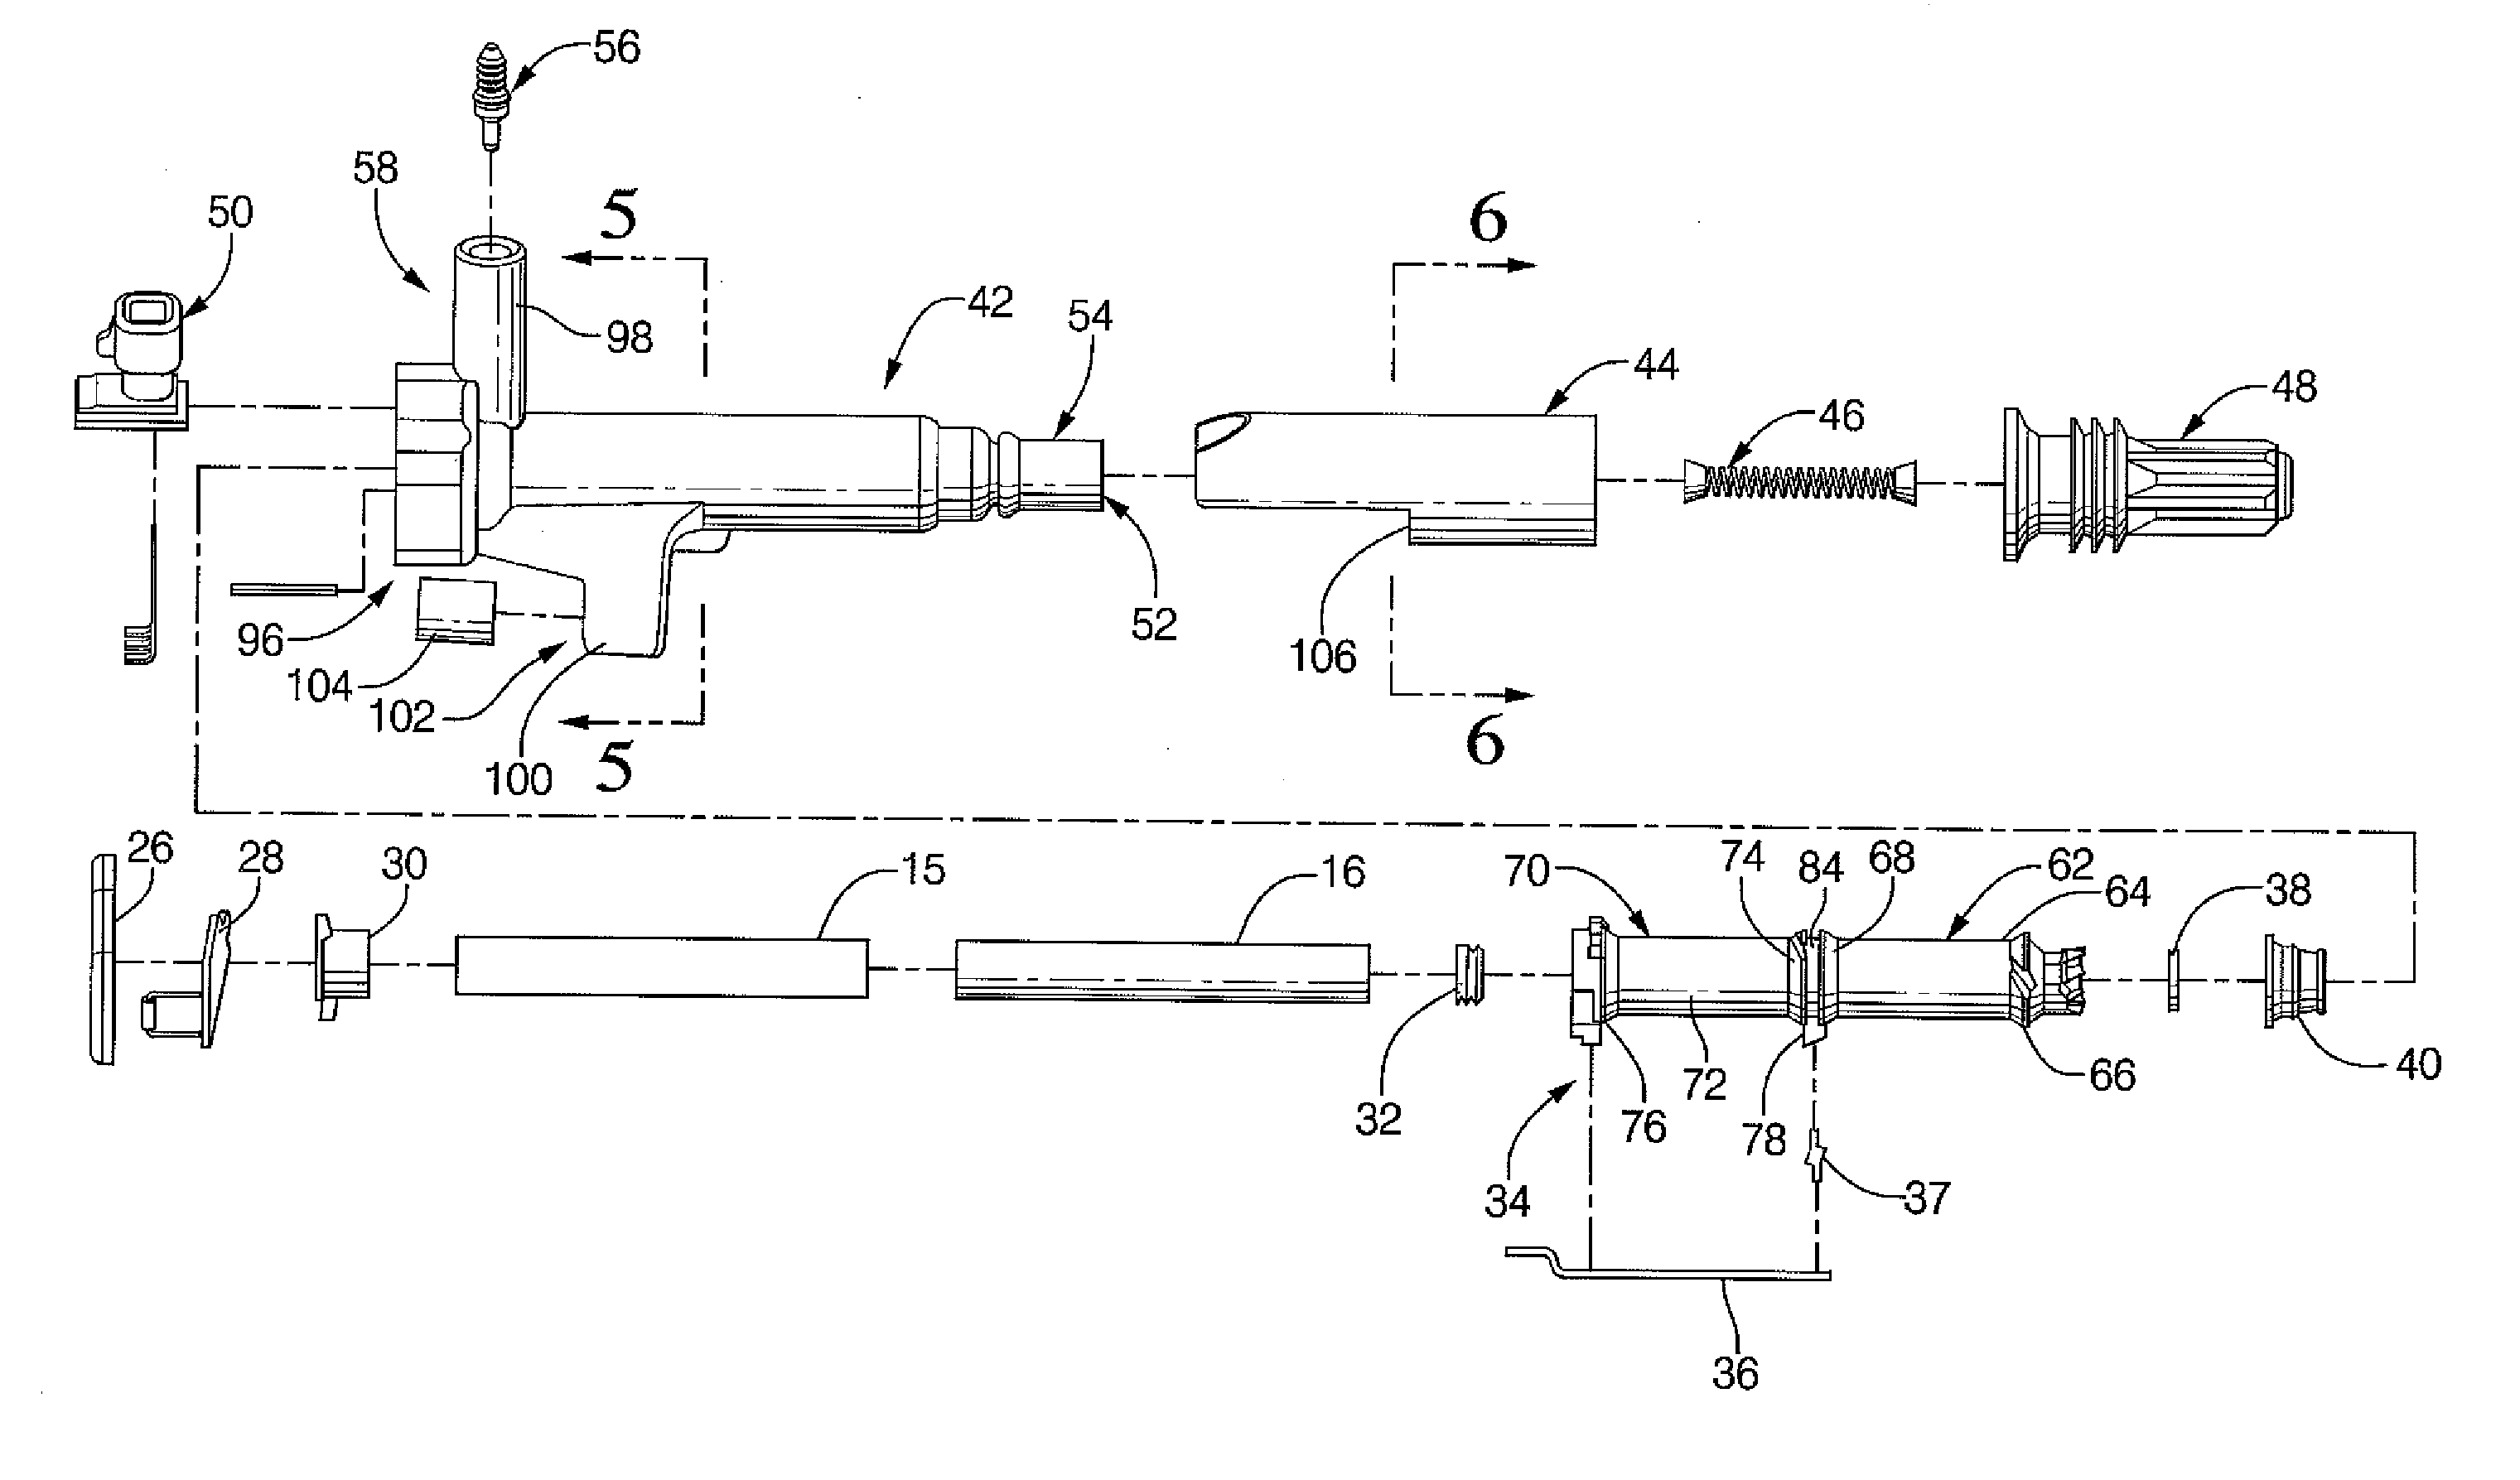 Twin spark ignition coil with provisions to balance load capacitance